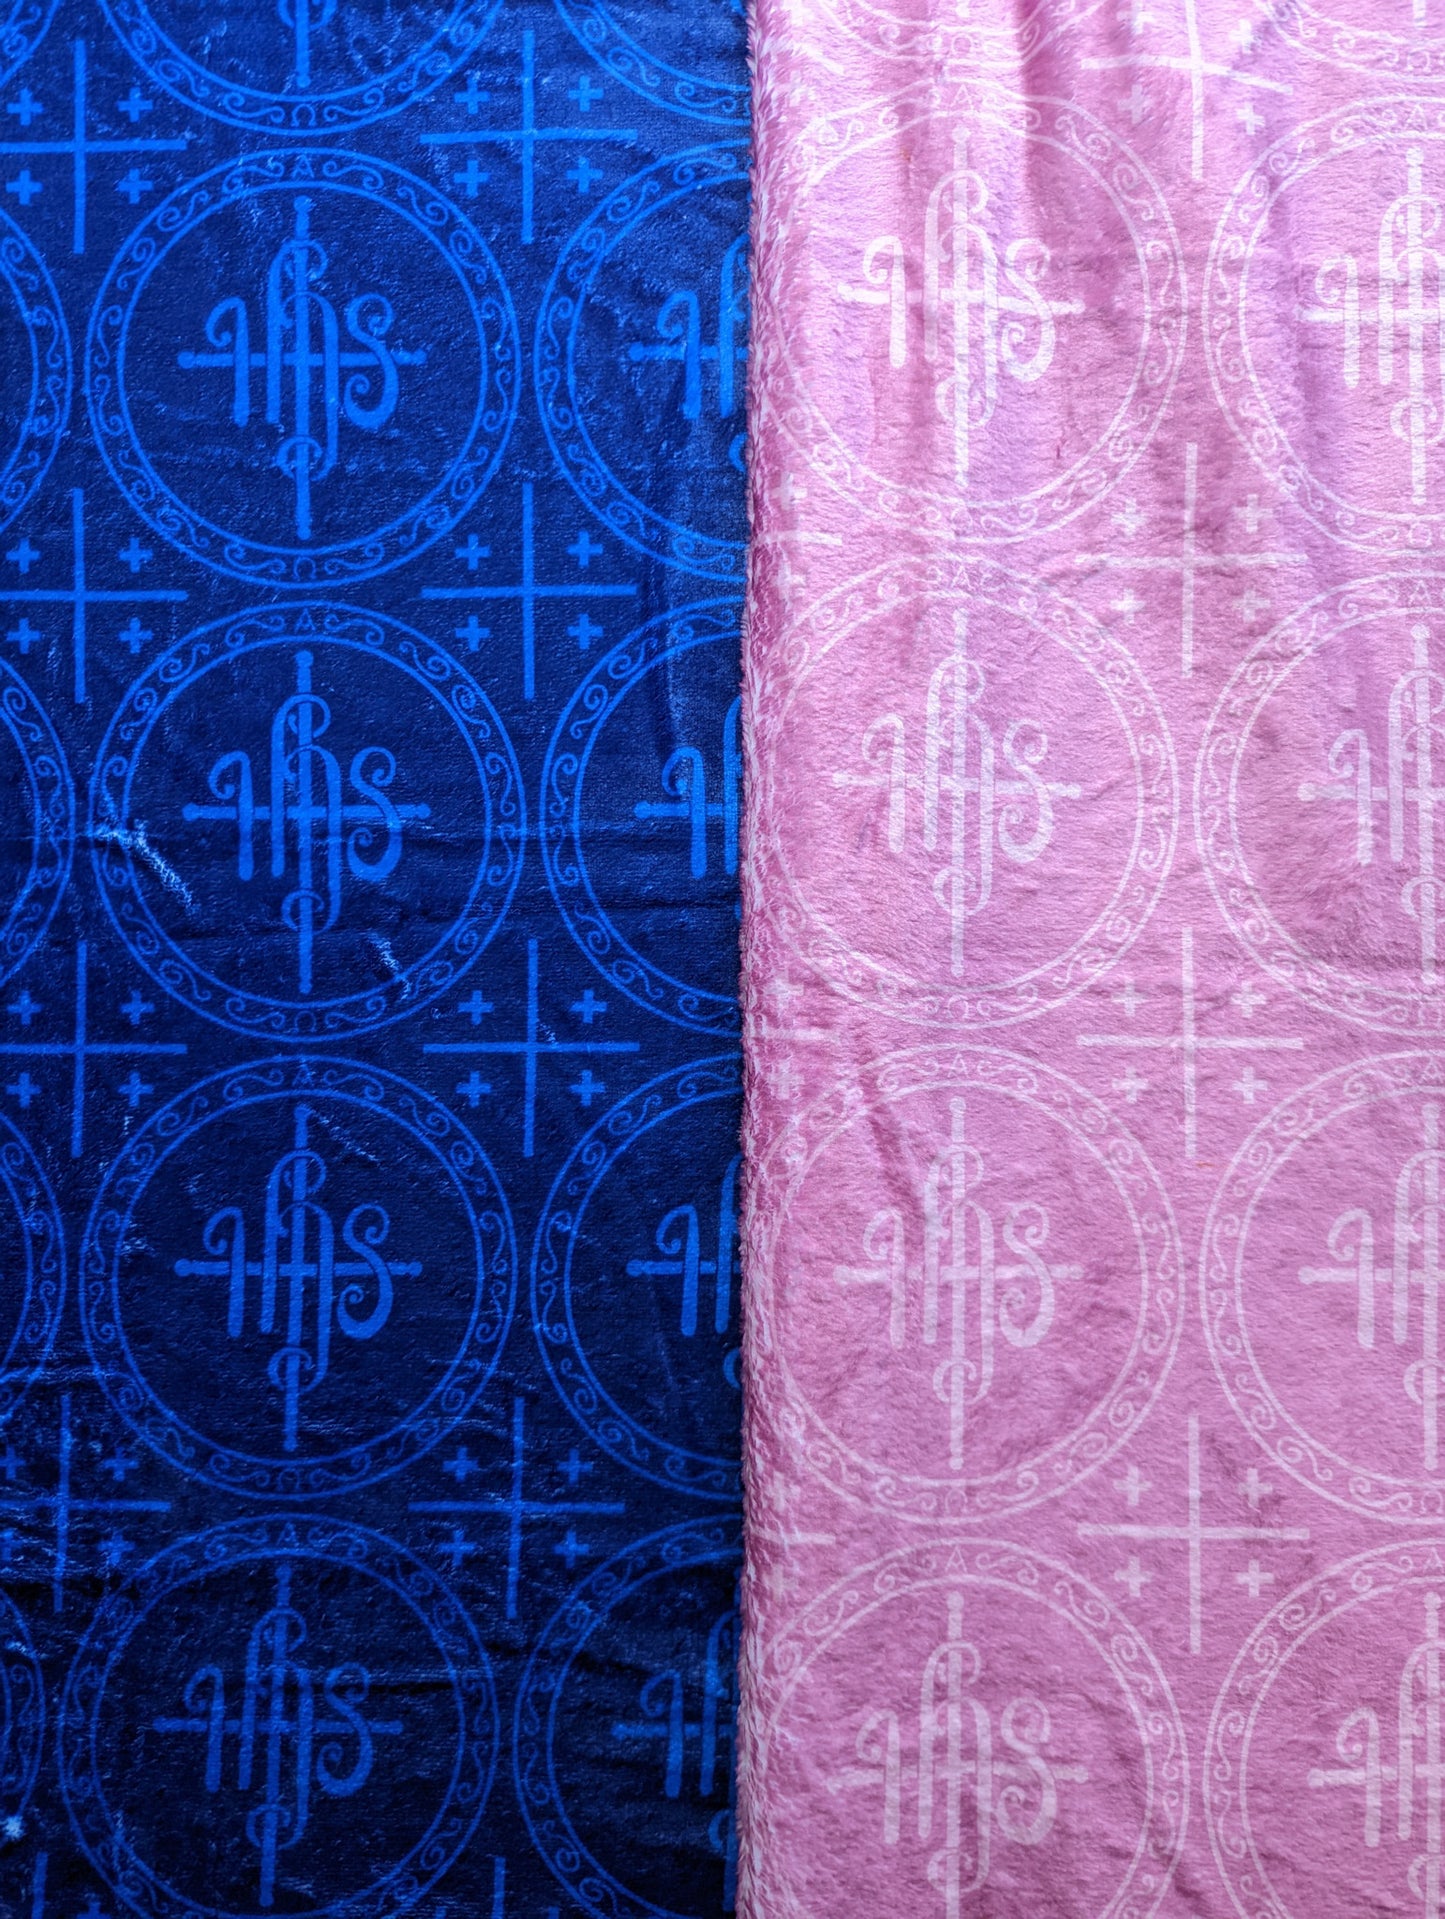 Blue and Pink IHS Altar Cloth and Vestment Blanket